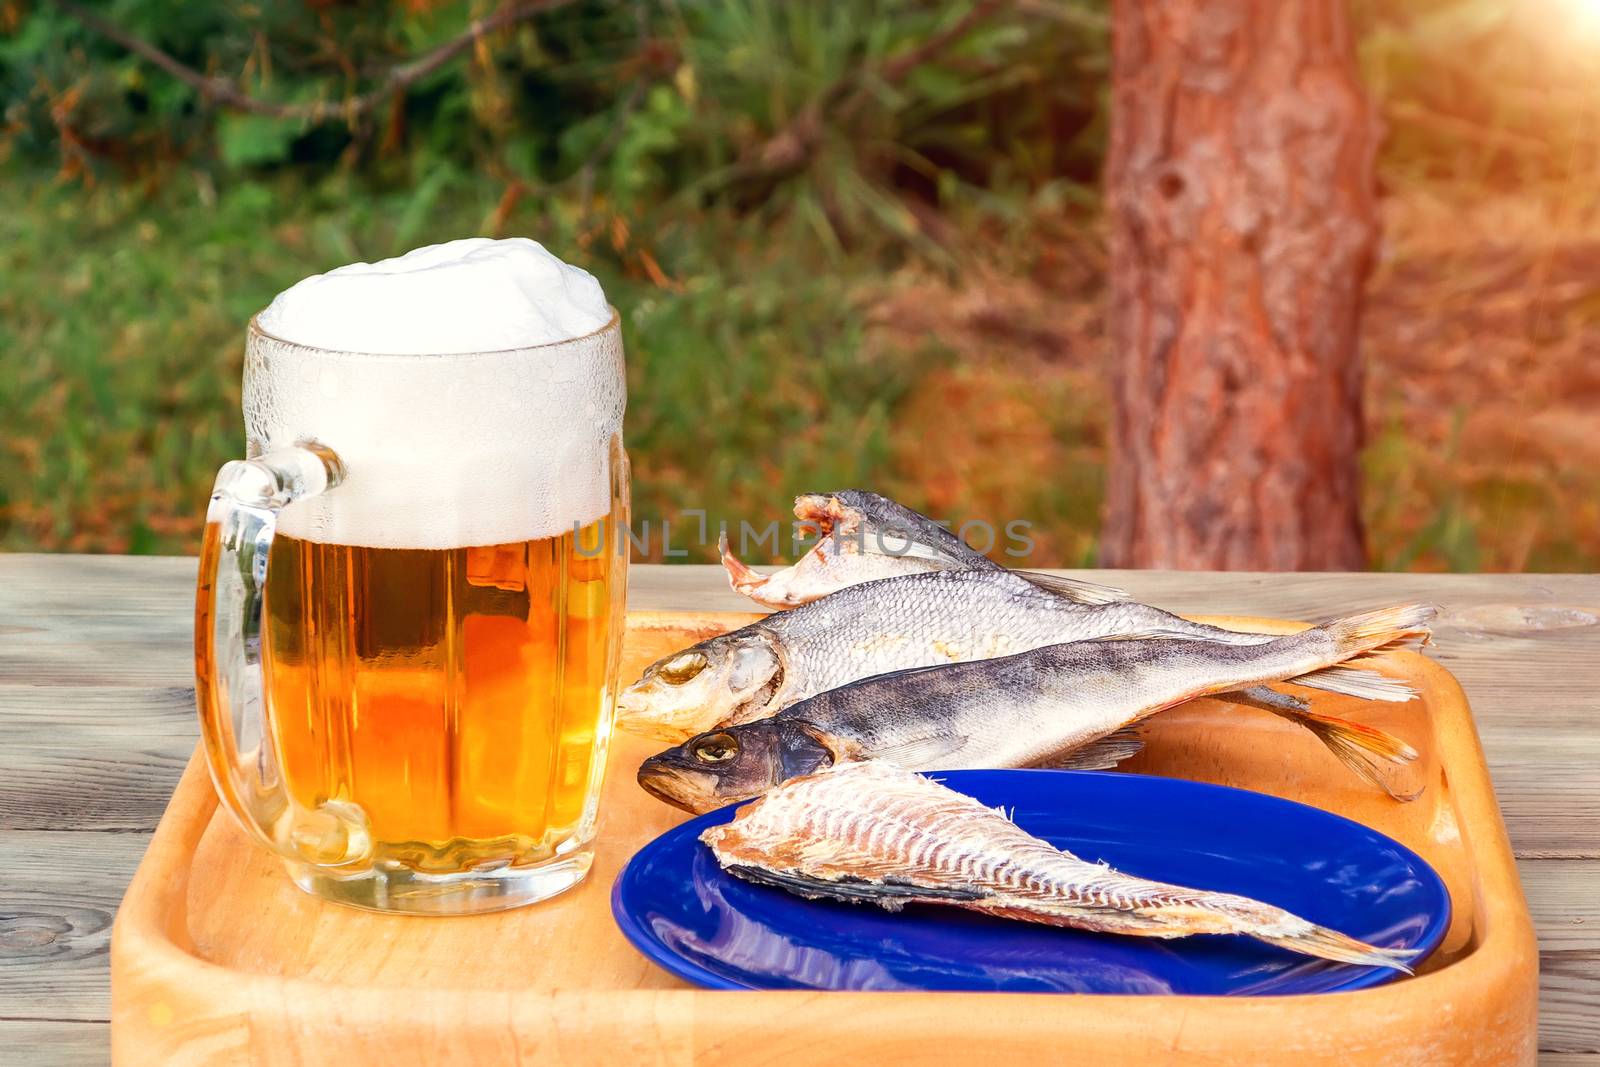 Mug of light beer and dried fish on a wooden table in a summer day outdoors - photo, image by galsand